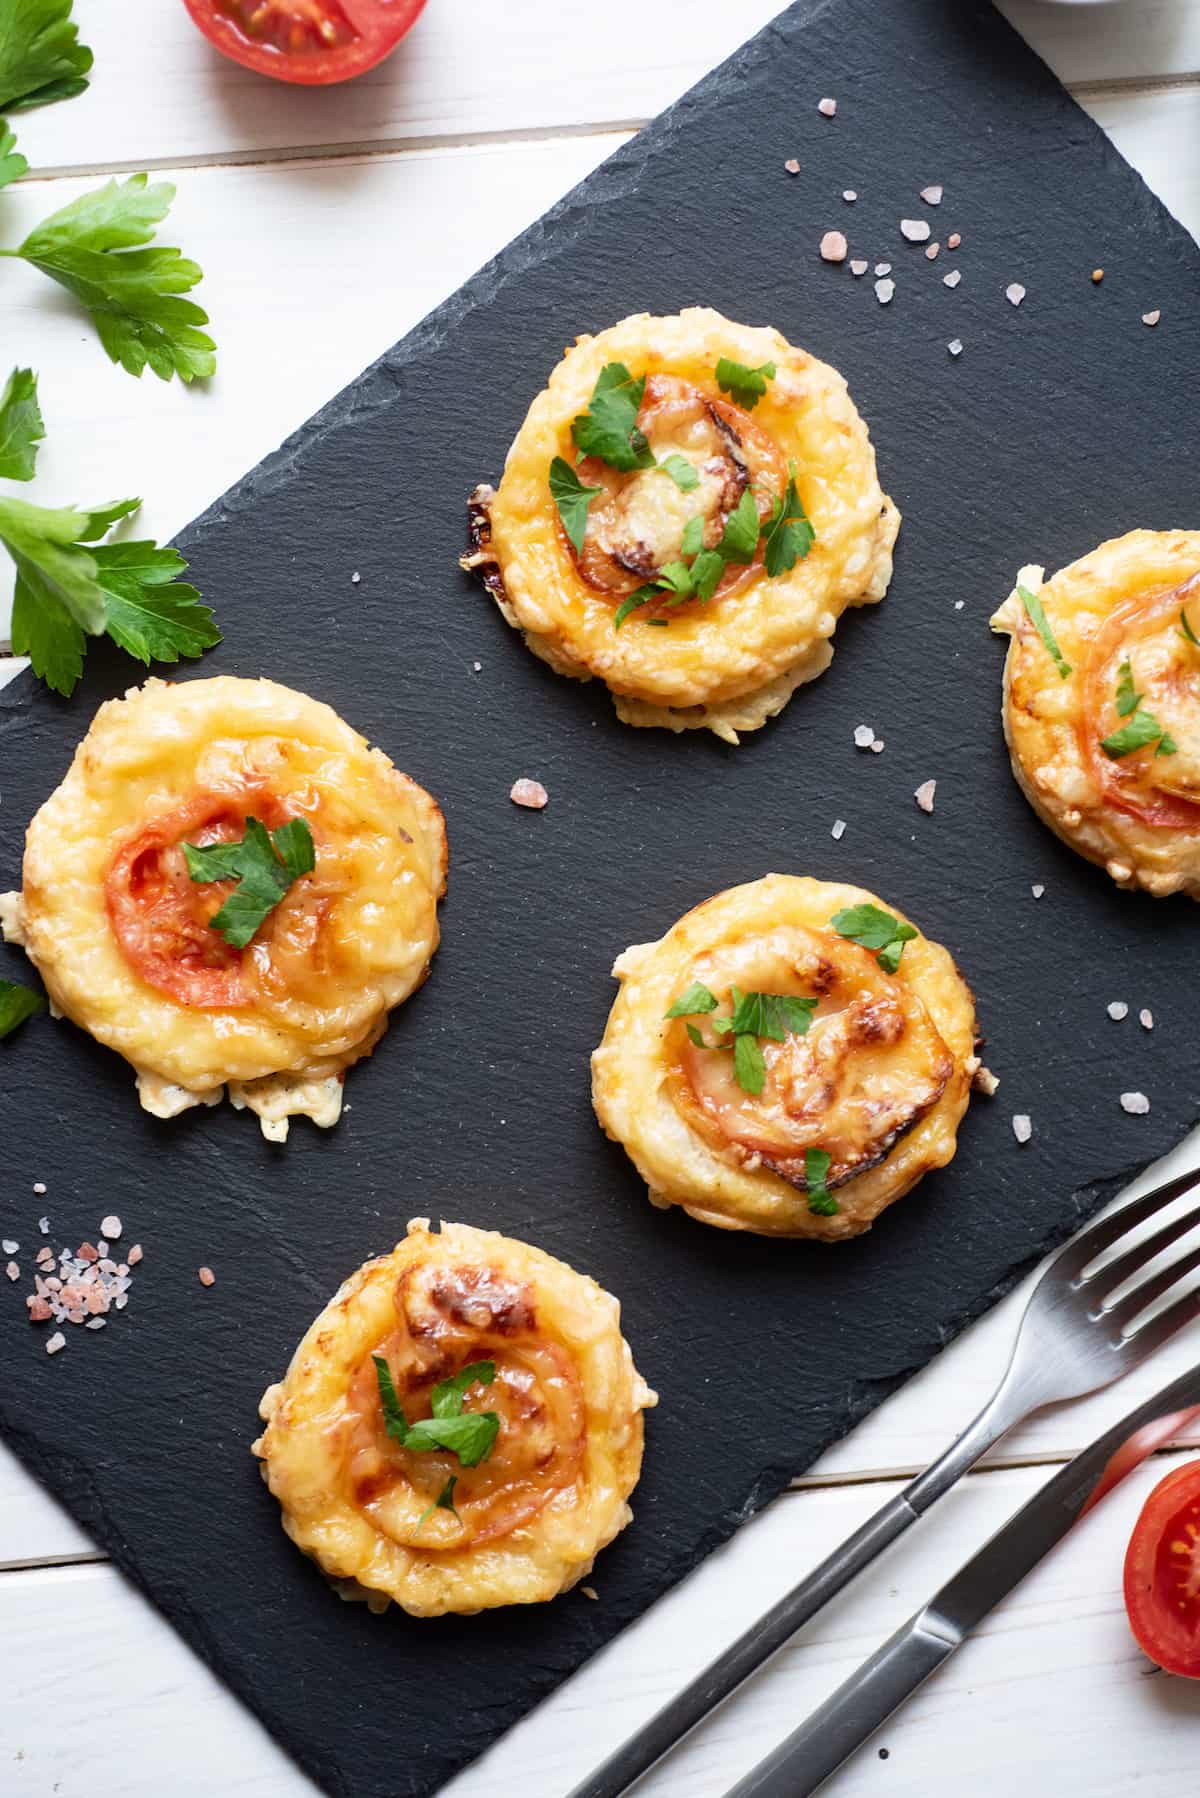 Tomato tarts on a black board with salt, pepper, parsley, and tomato.